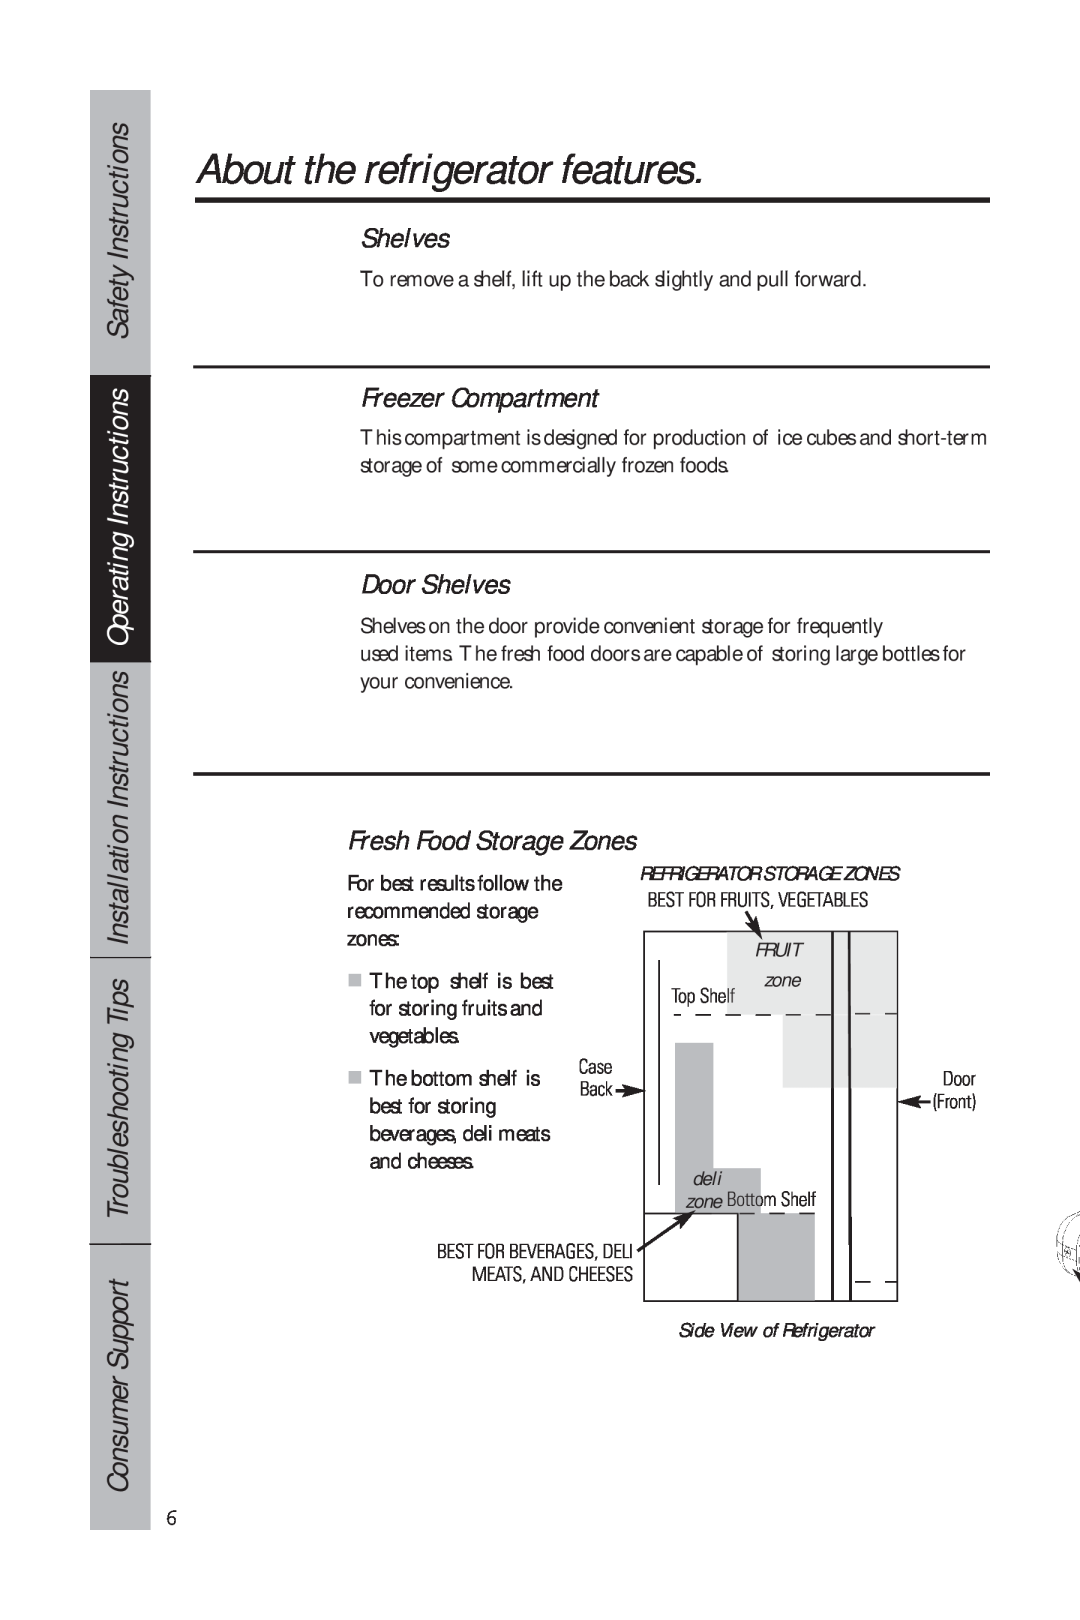 GE 49-60634-1 owner manual About the refrigerator features, Freezer Compartment, Door Shelves, Fresh Food Storage Zones 